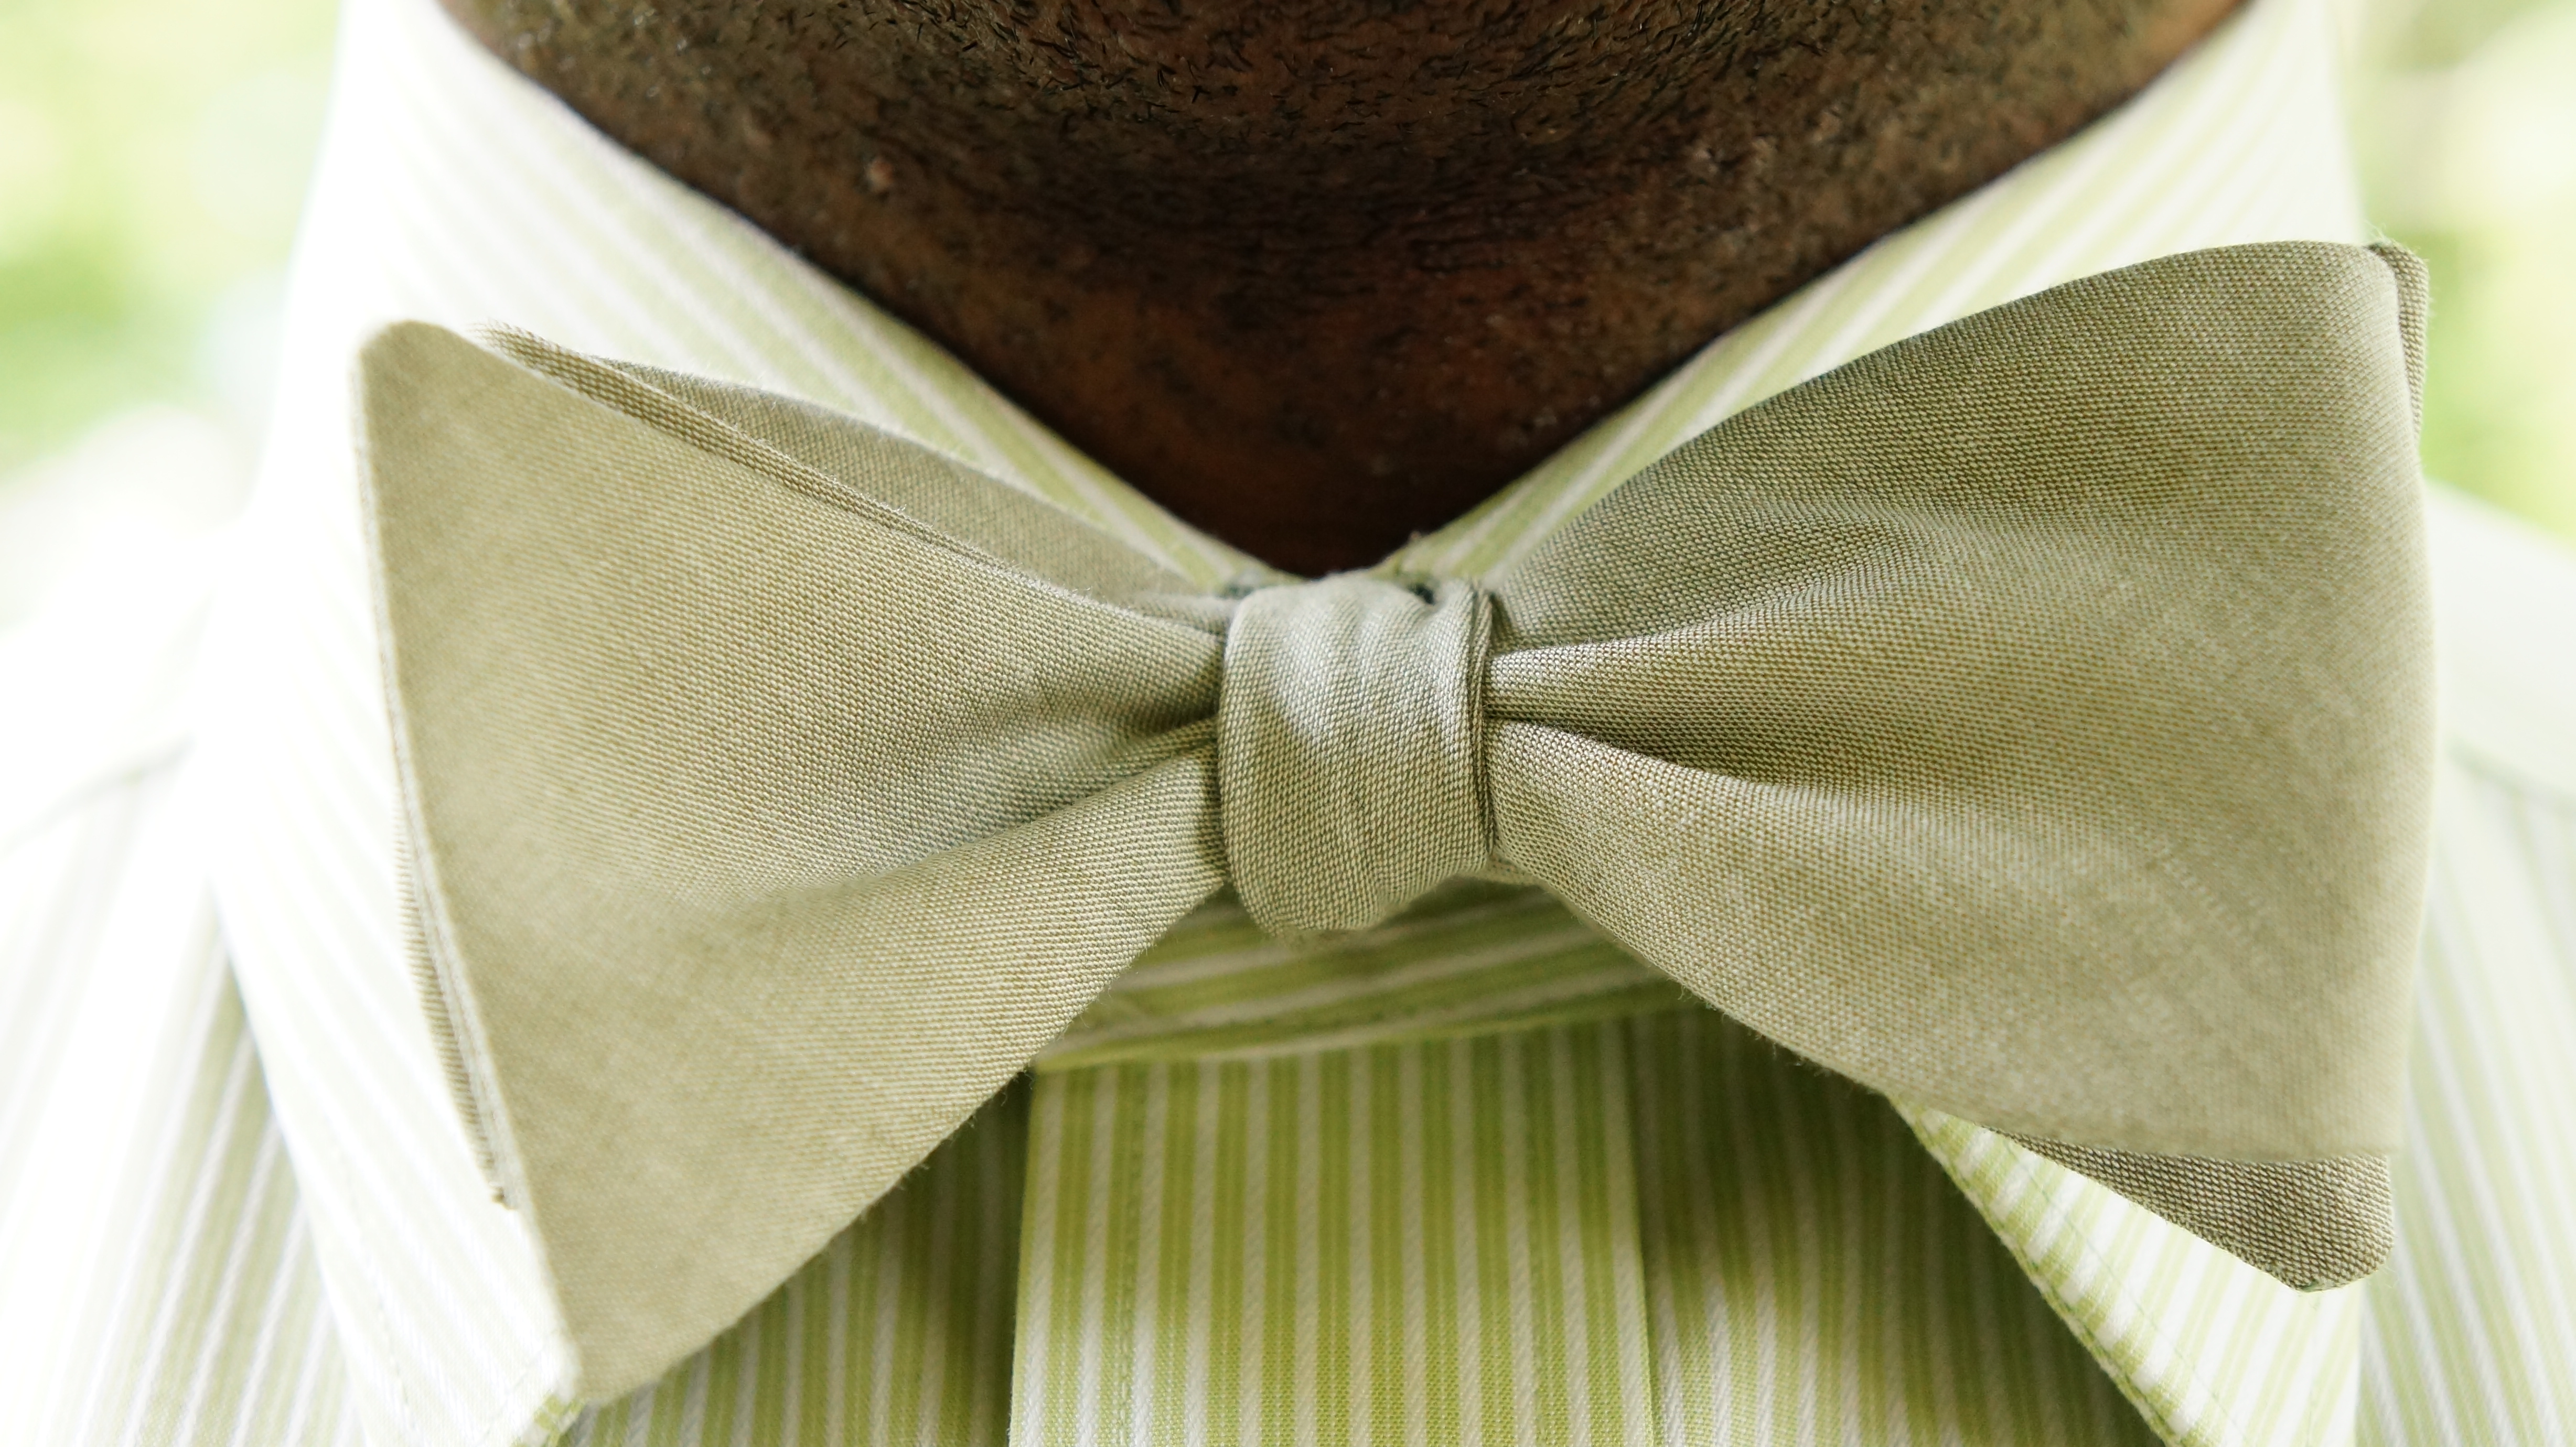 Headline for The Bow Tie Naming Rights Contest (Sage)